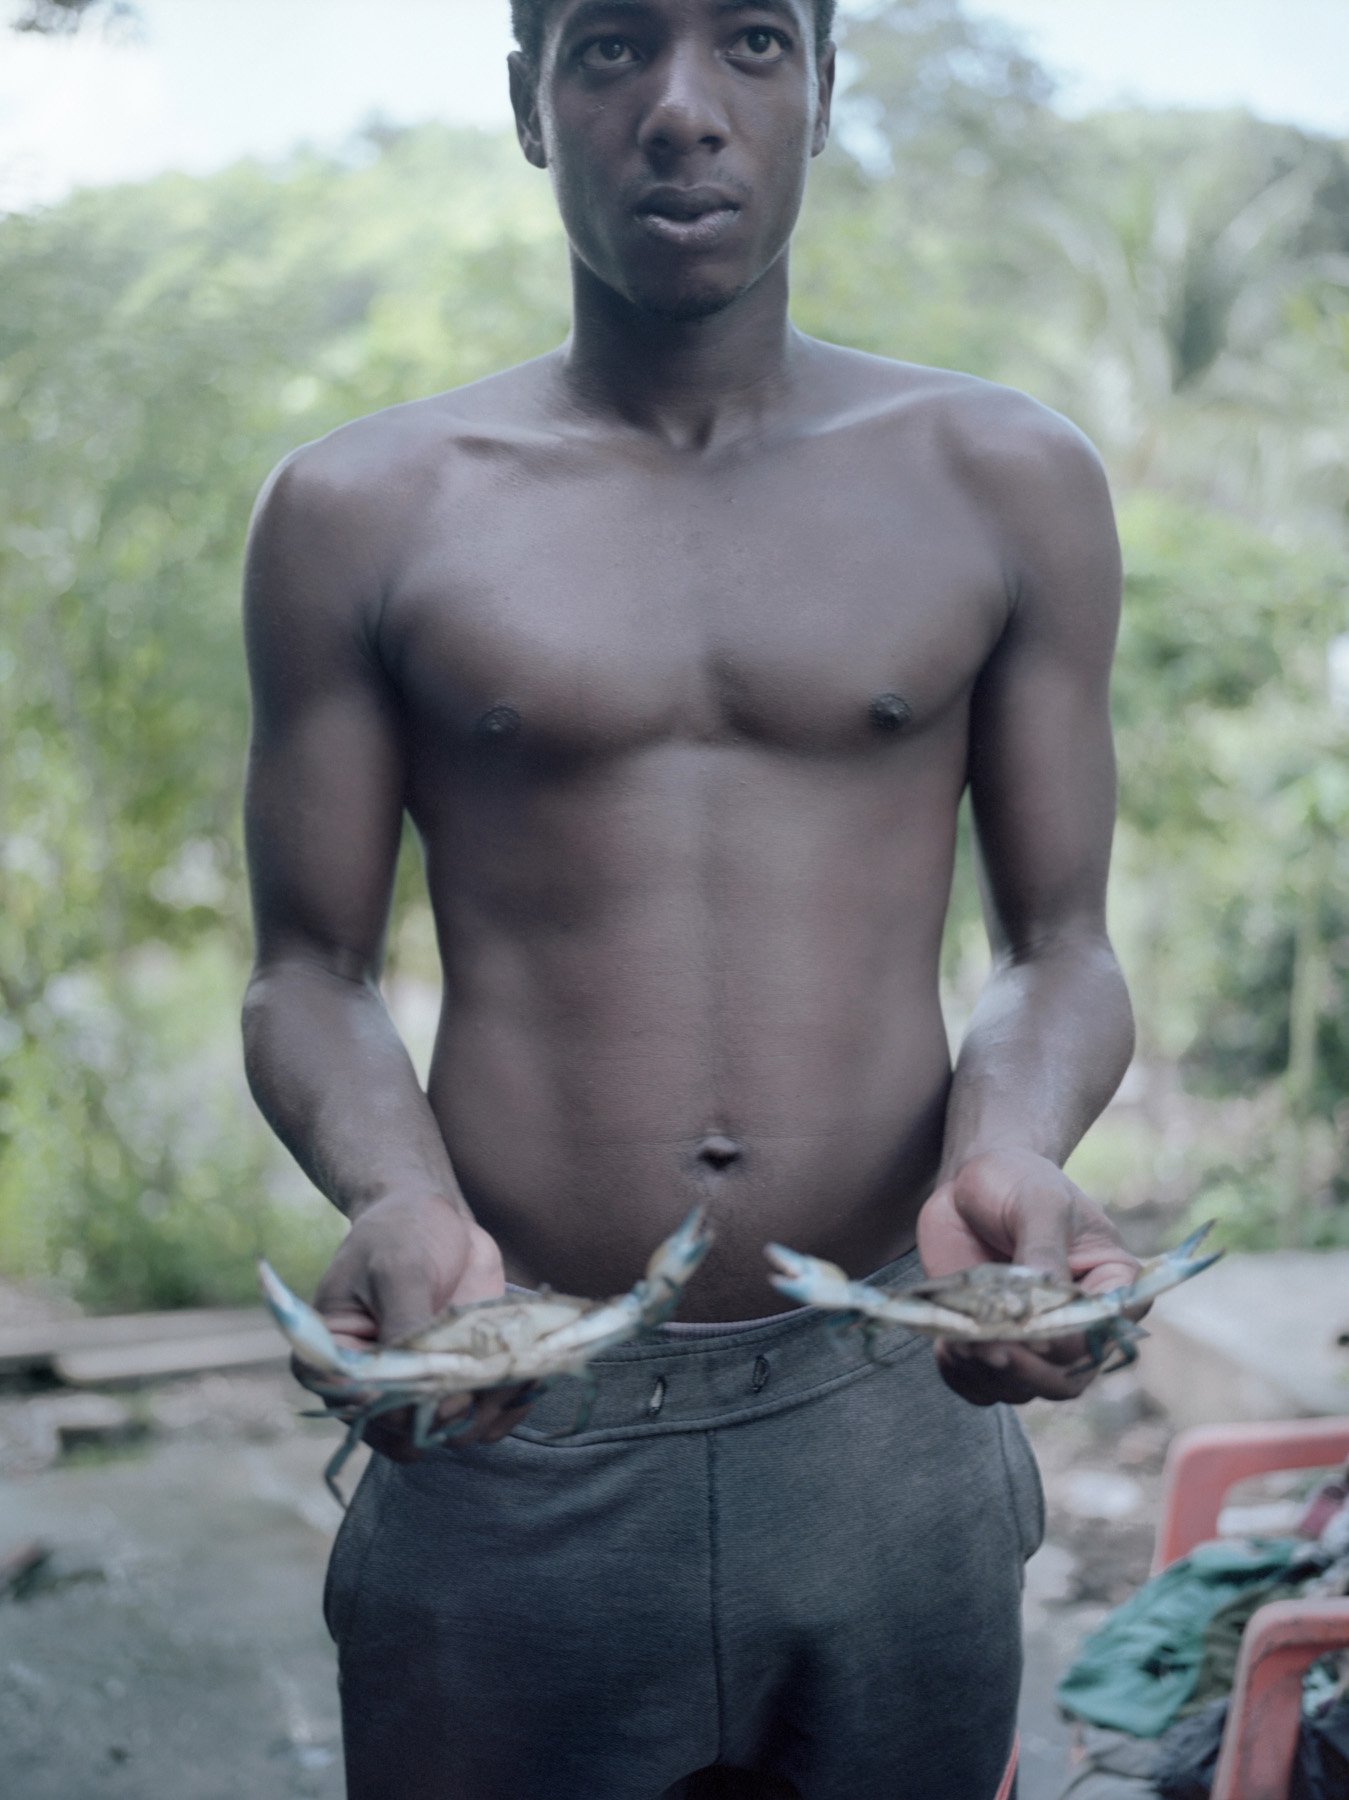  Ilha da Maré, Bahia, 2020. Diego, the son of the activist Eliete Paraguassu, shows 2 fished crabs, the main product sold by the Quilombolas. The Ilha da Mare is the home of several Quilombola’s communities that live of fishing. The waters where they